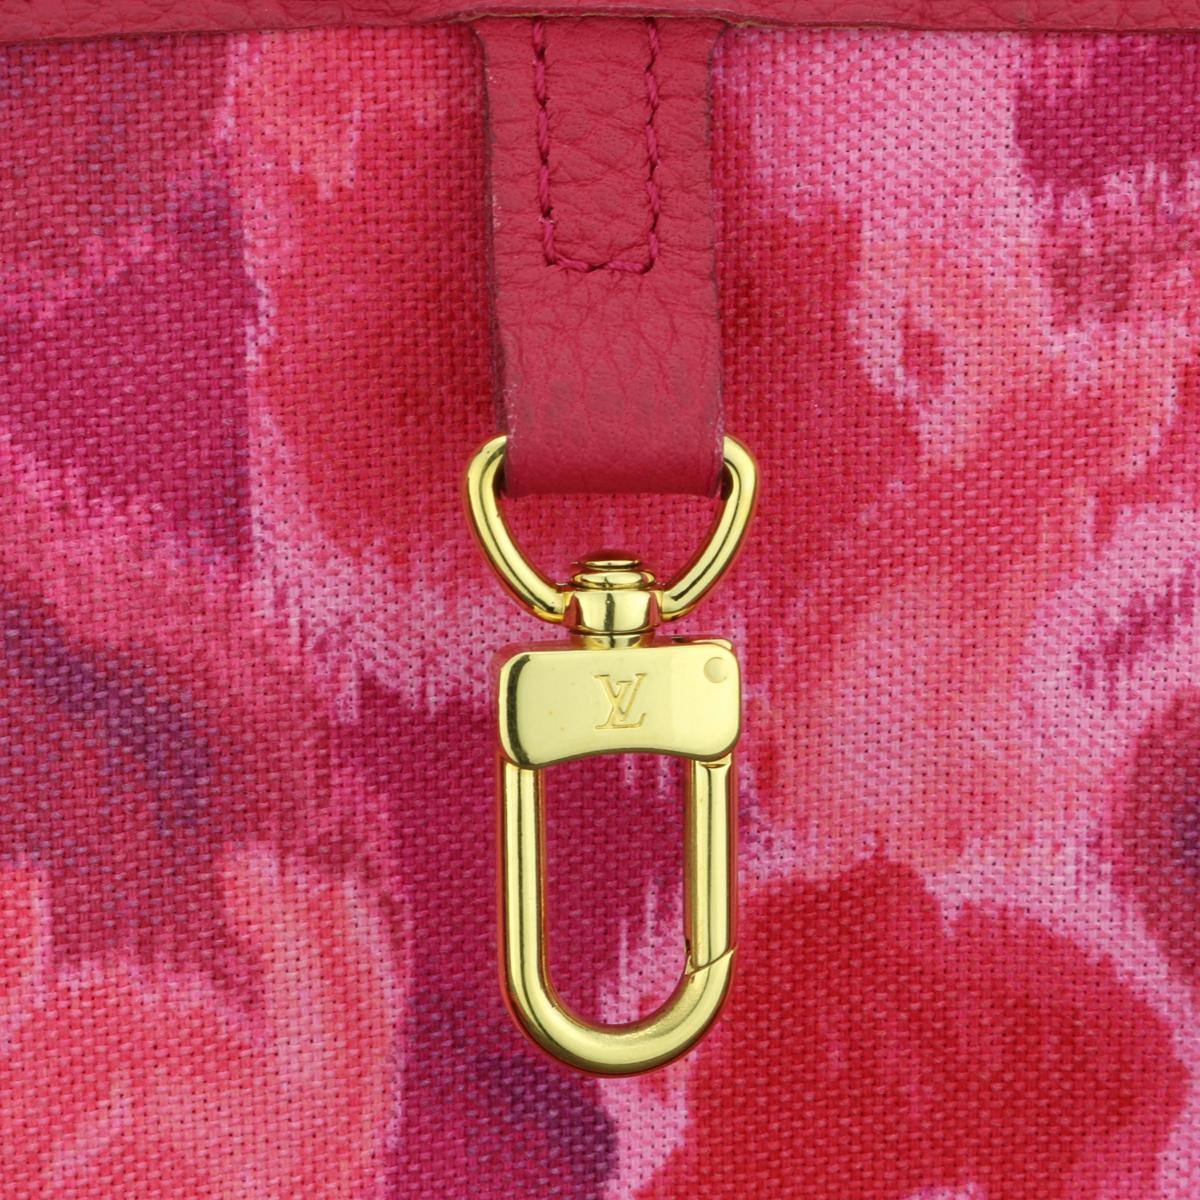 Louis Vuitton Neverfull MM Ikat Bag in Monogram Fuchsia 2013 Limited Edition For Sale 12